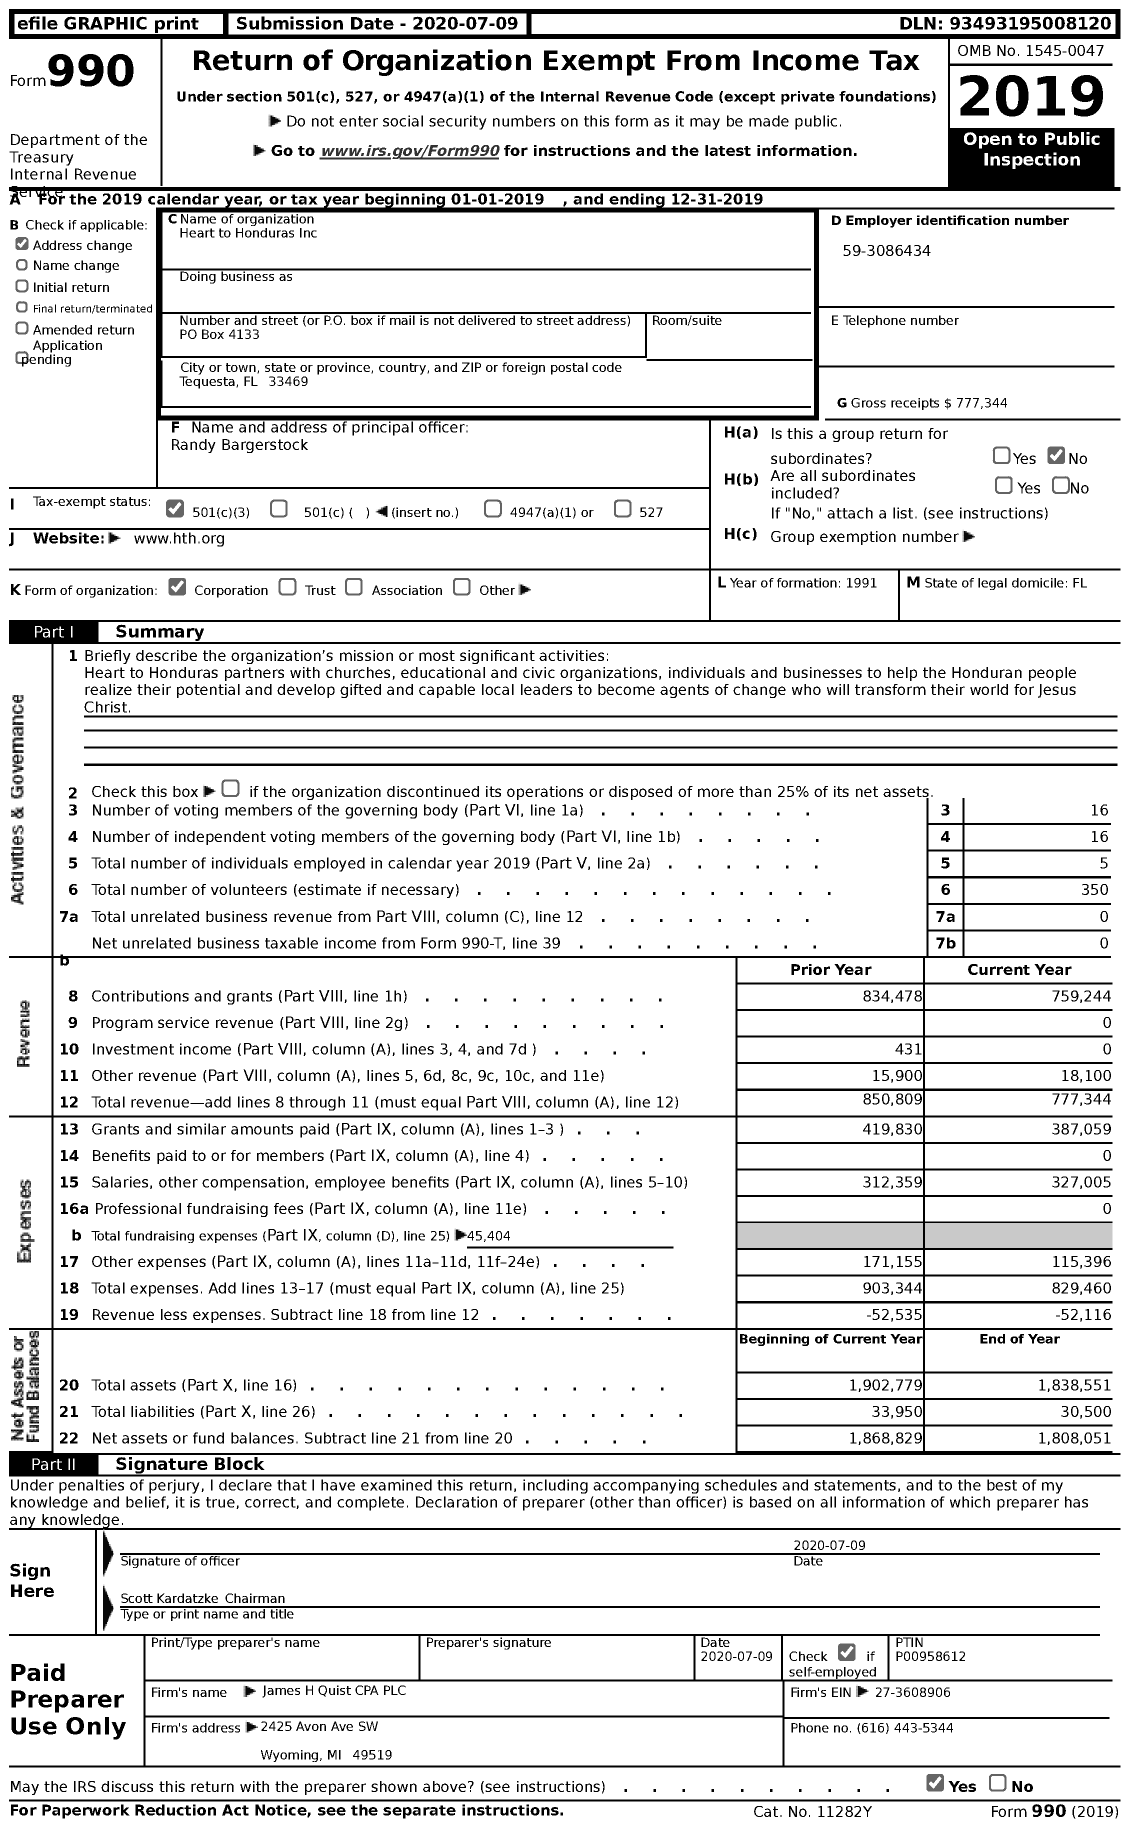 Image of first page of 2019 Form 990 for Heart to Honduras (HTH)